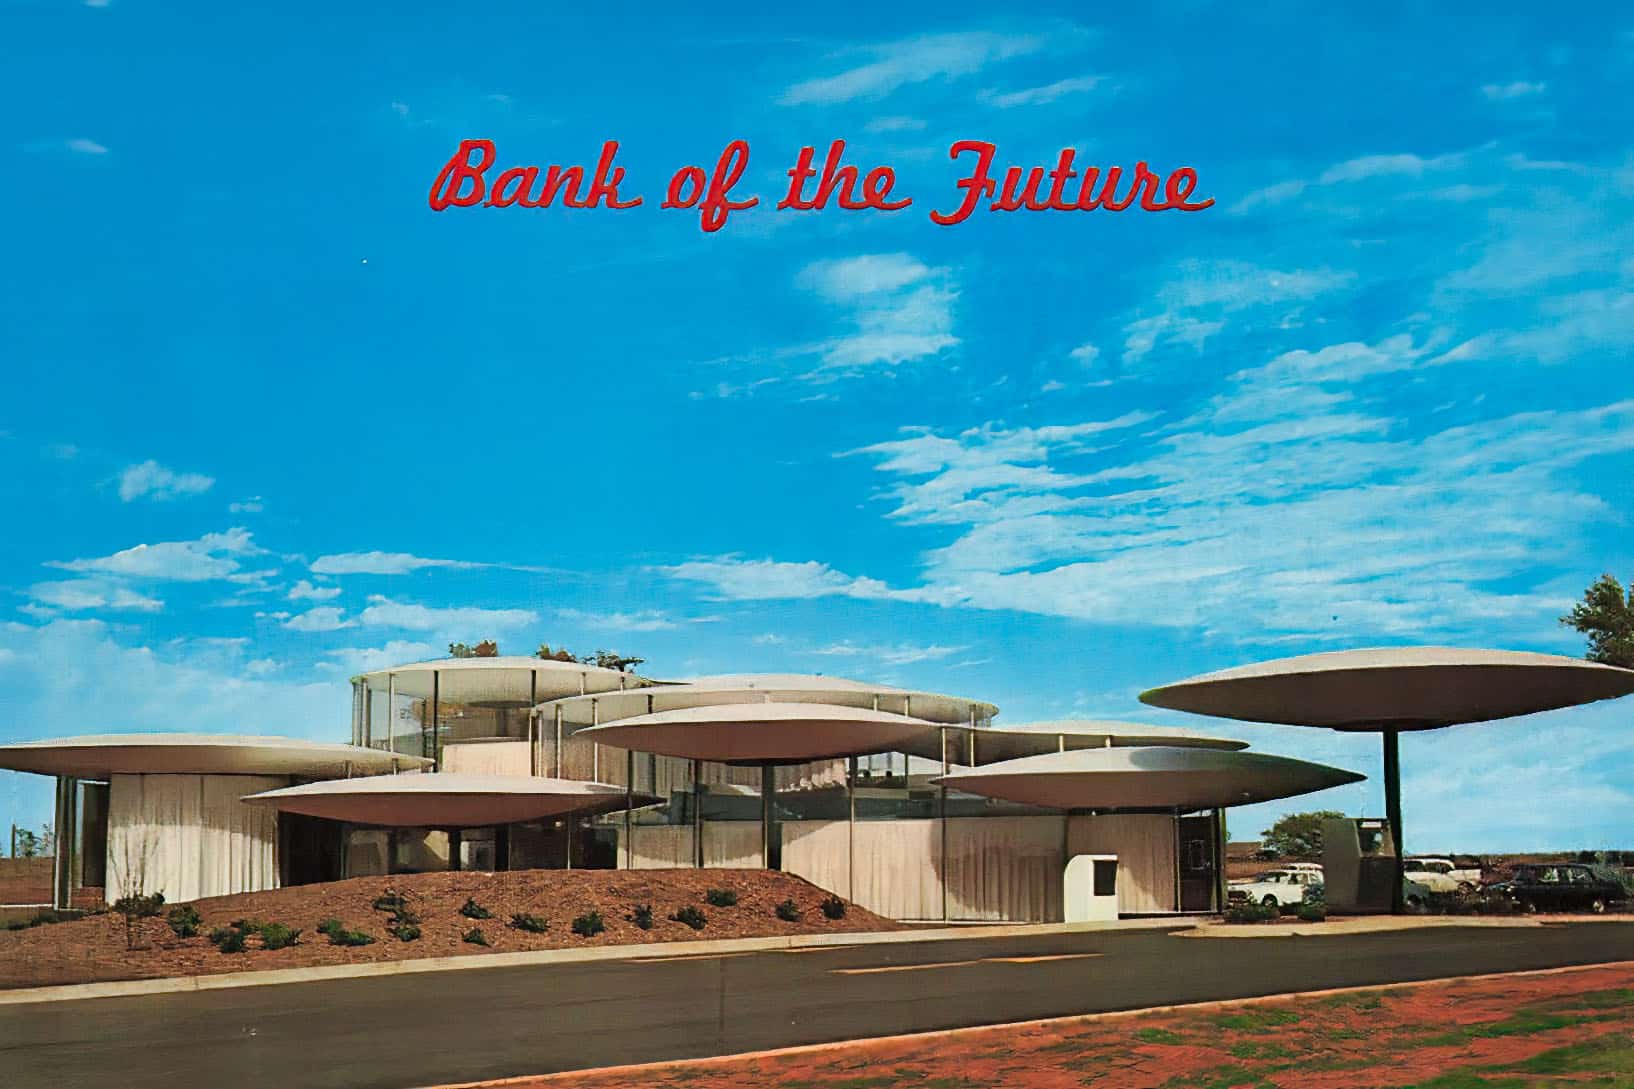 Bank of the future.